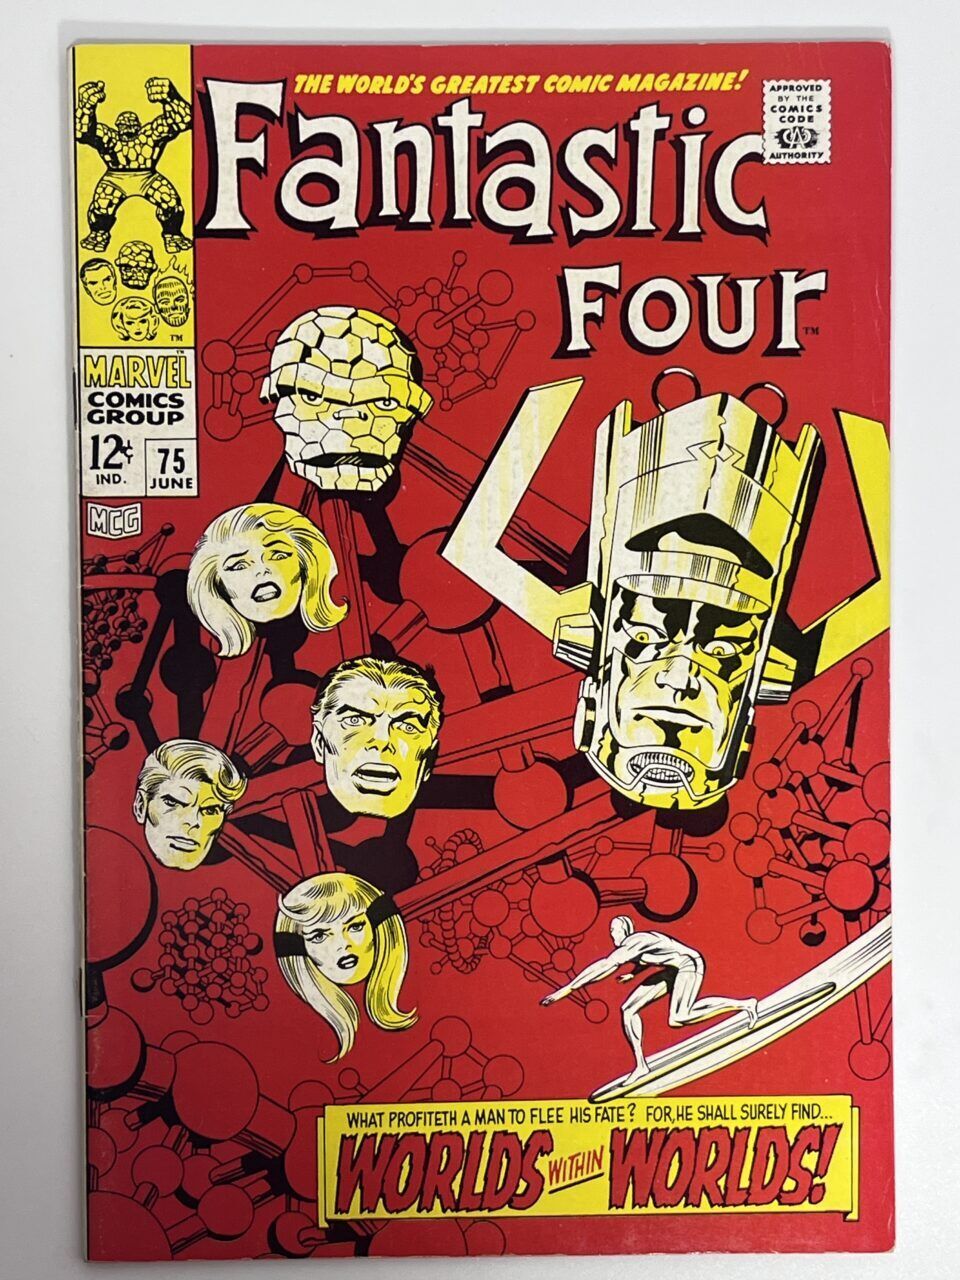 Fantastic Four #75 (1968) Classic cover art by Jack Kirby; bottom staple loos...